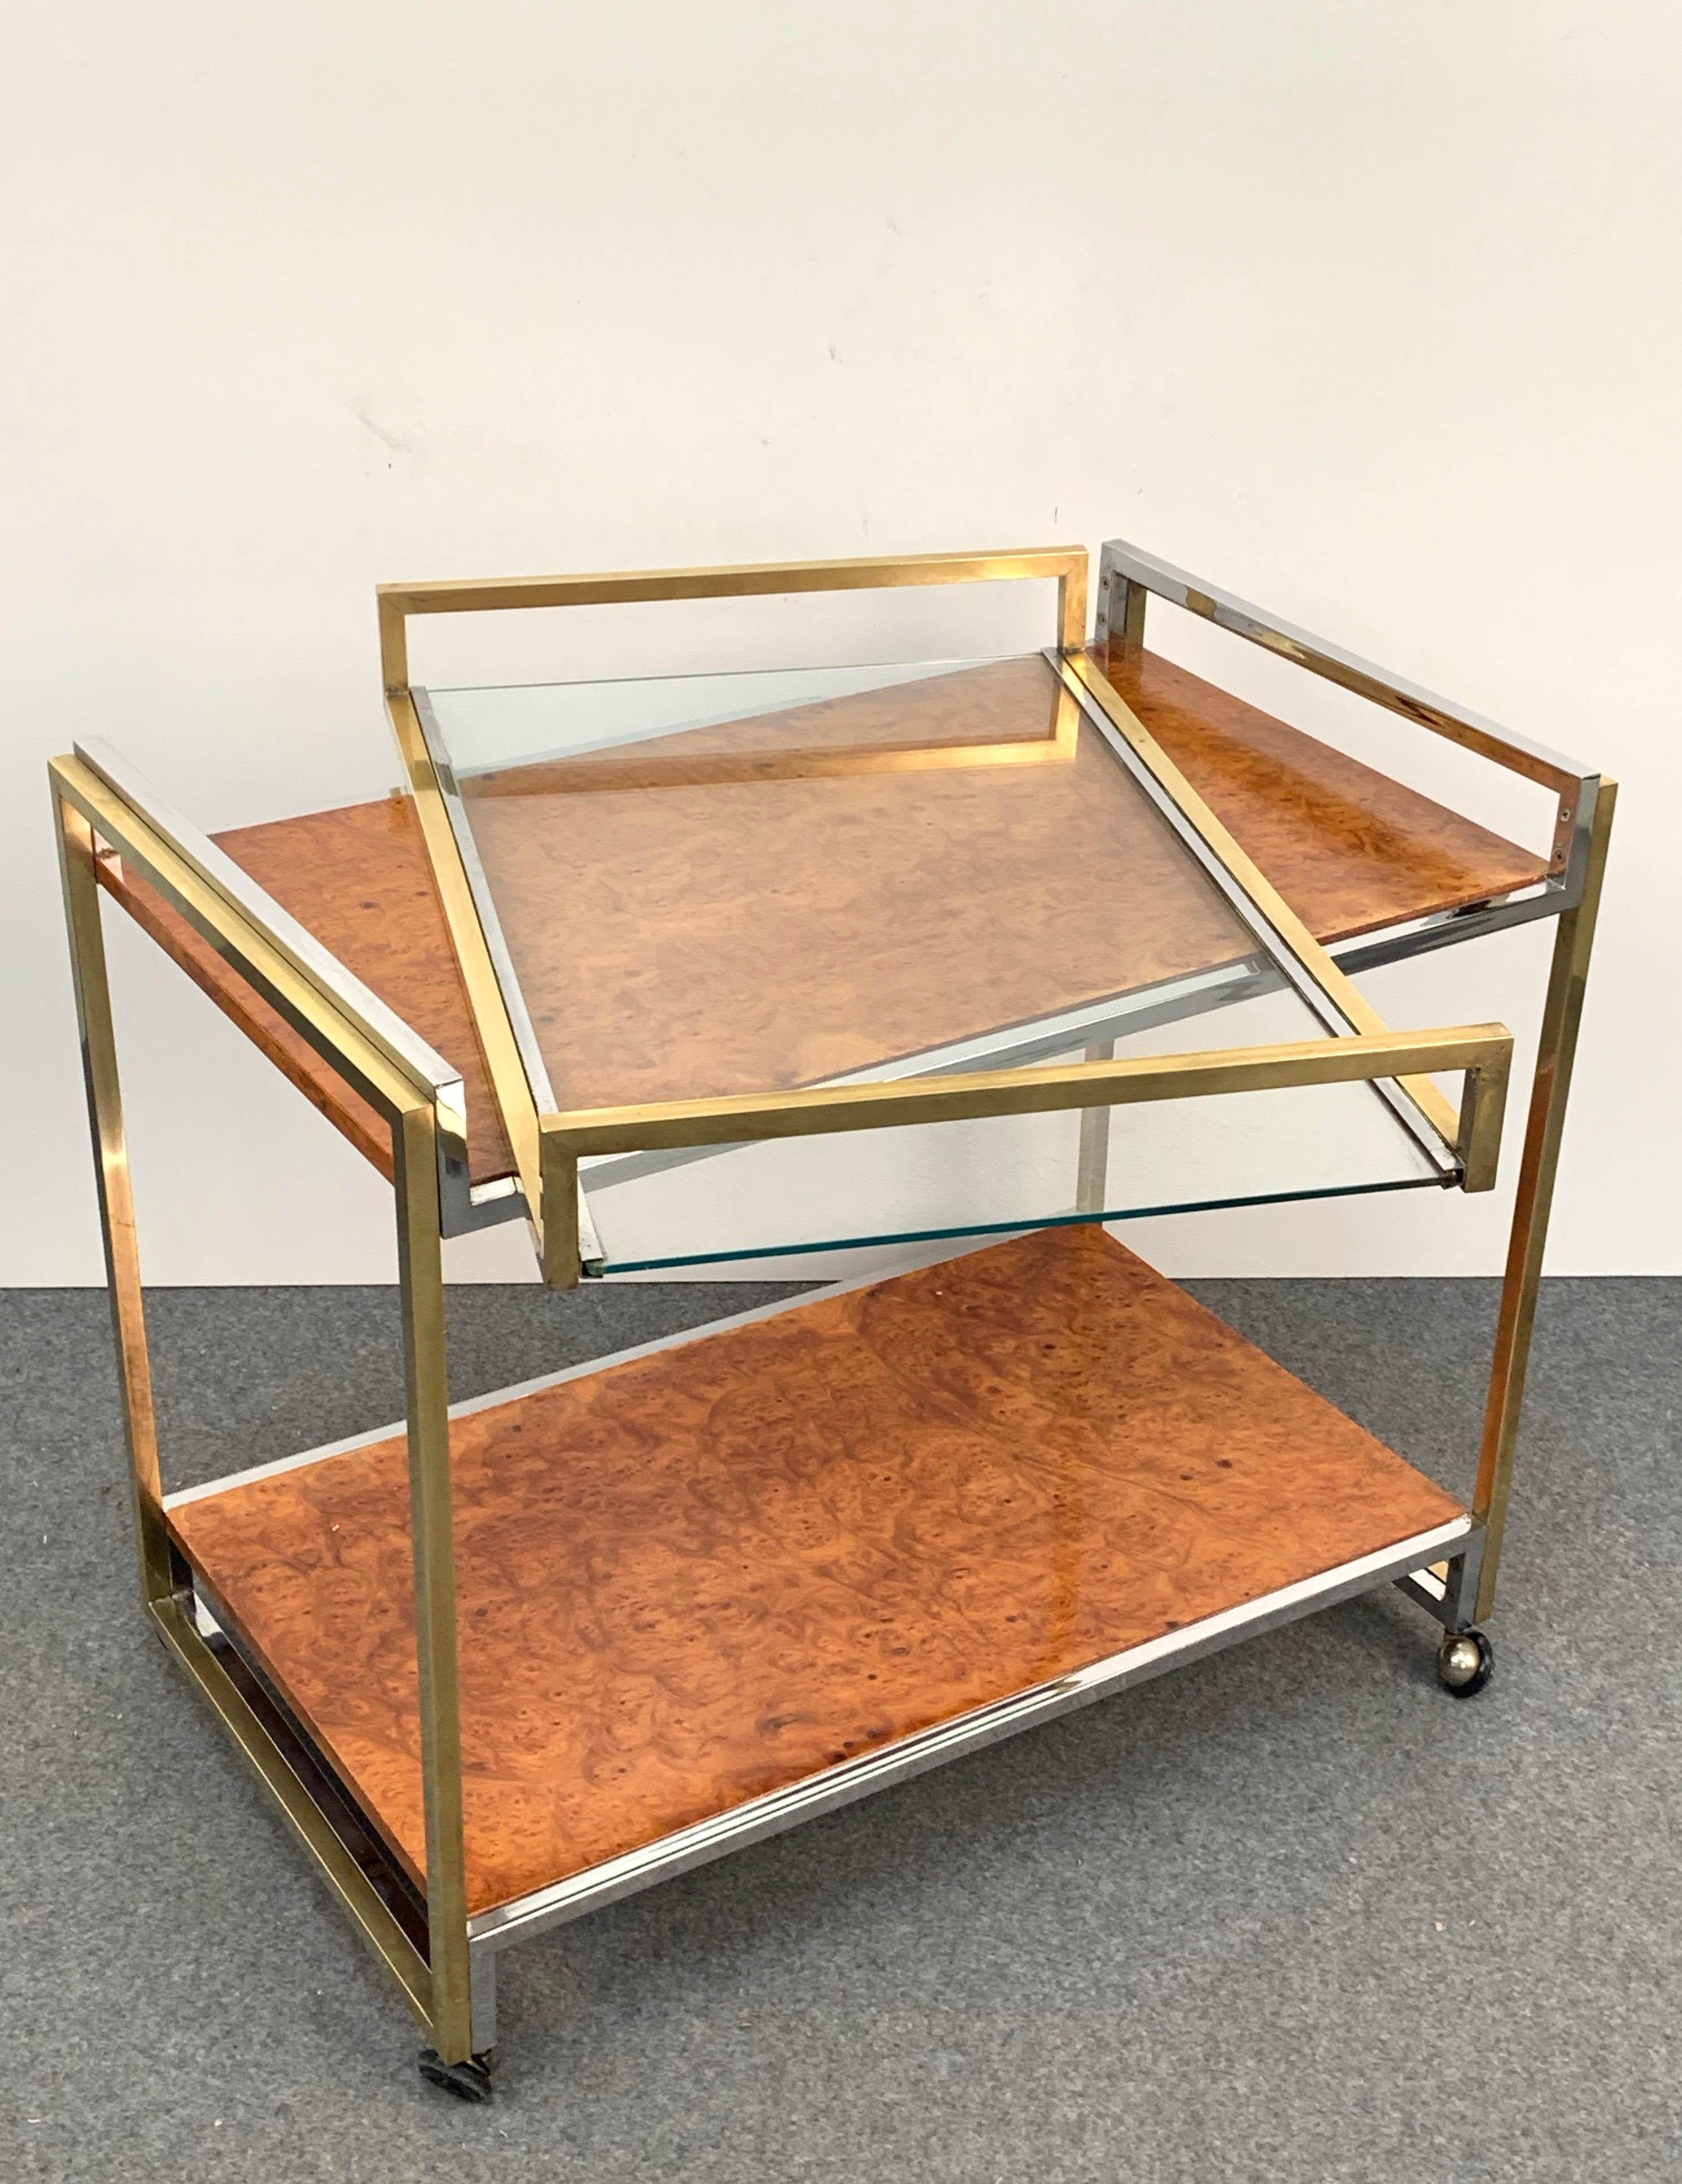 Wonderful Italian trolley in briar with finishes in chrome and brass. It has a removable service glass service tray with finishes in brass and chrome. 

This 1980s production is attributed to Willy Rizzo and has wonderful straight lines and